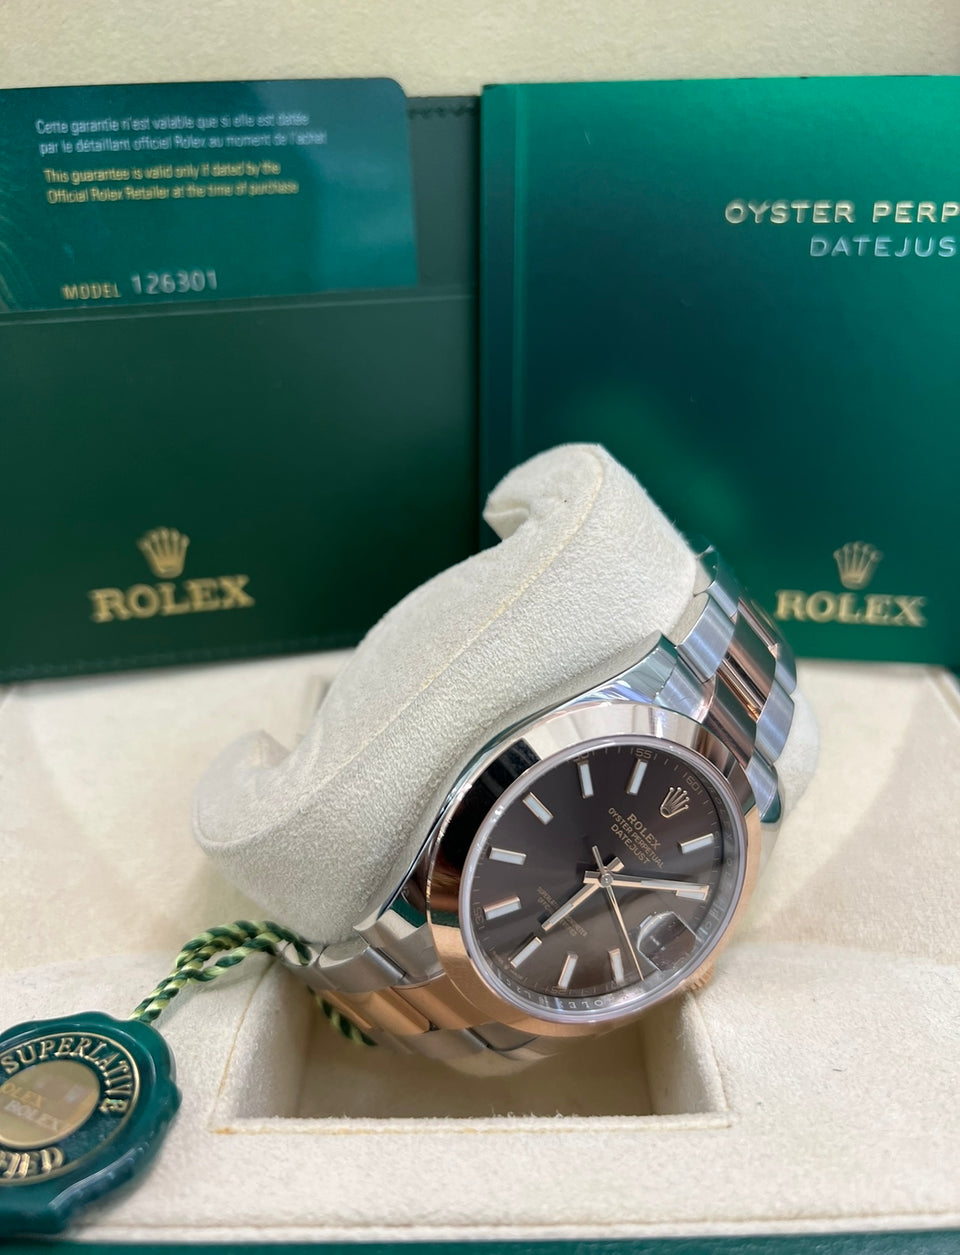 Rolex Steel and Everose Rolesor Datejust 41 Watch - Smooth Bezel - Chocolate Index Dial - Oyster Bracelet